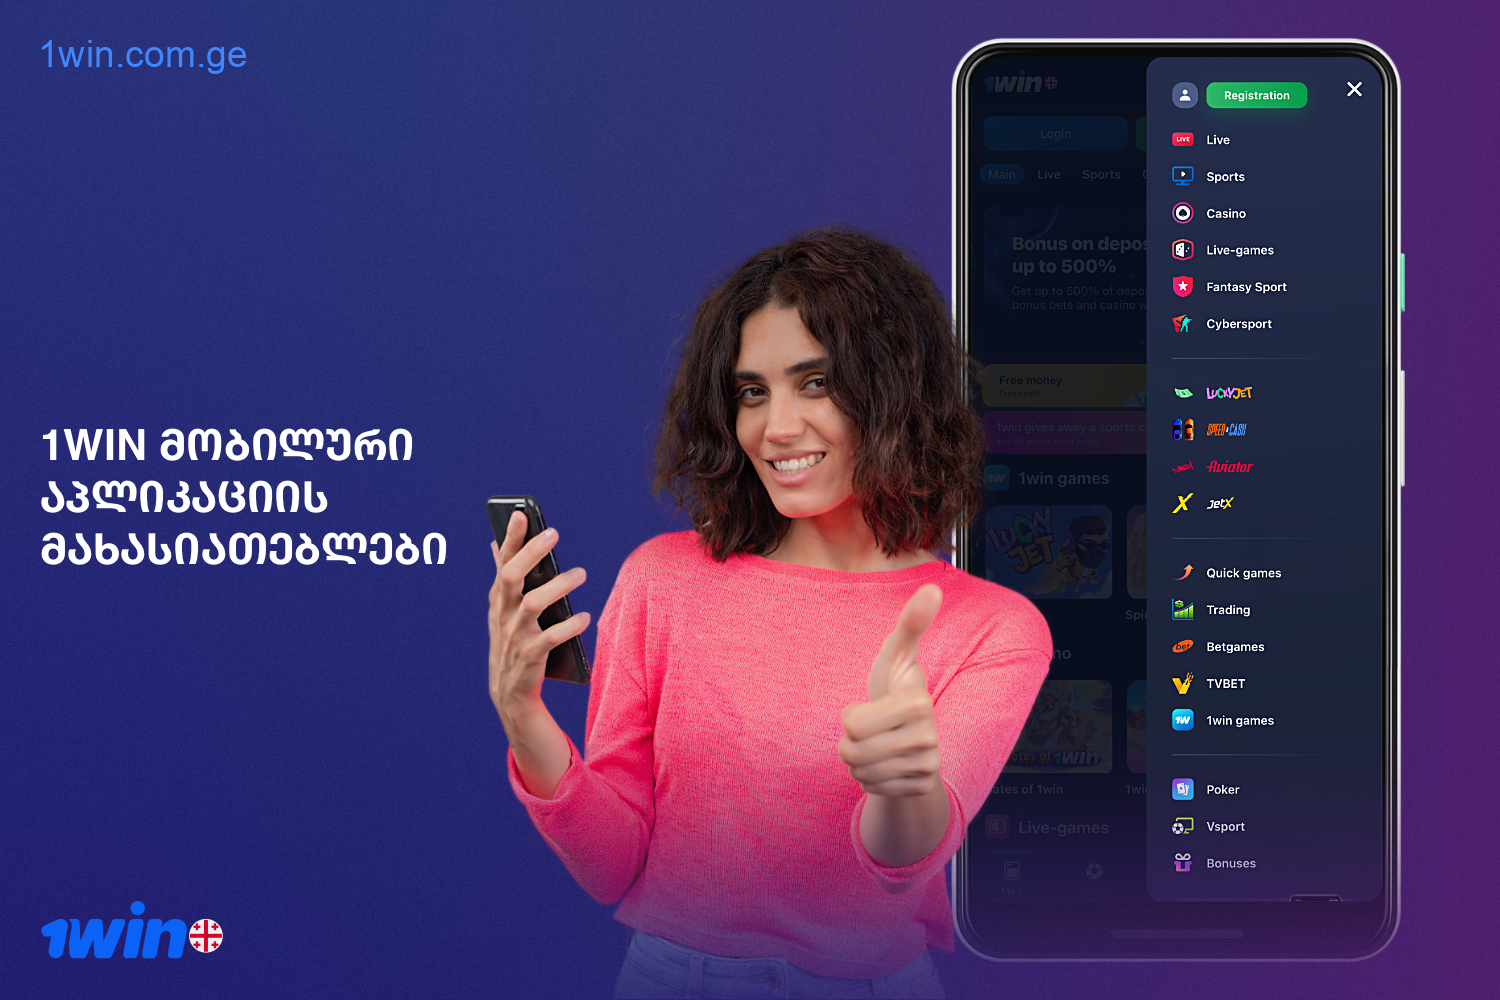 1win mobile app has many features